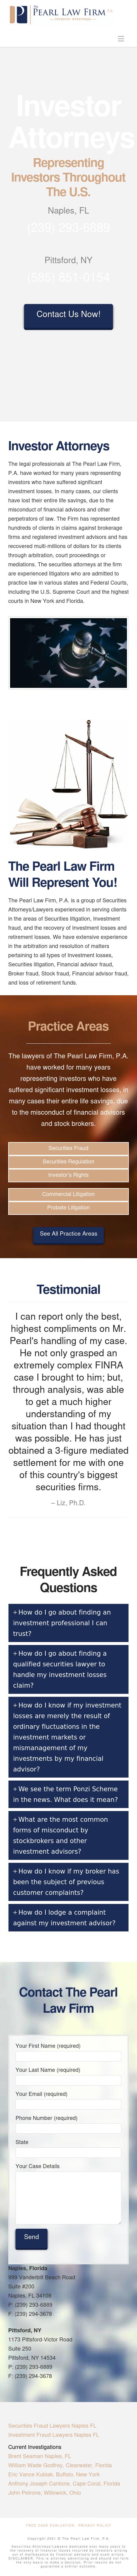 Pearl Law Firm PA - Pittsford NY Lawyers